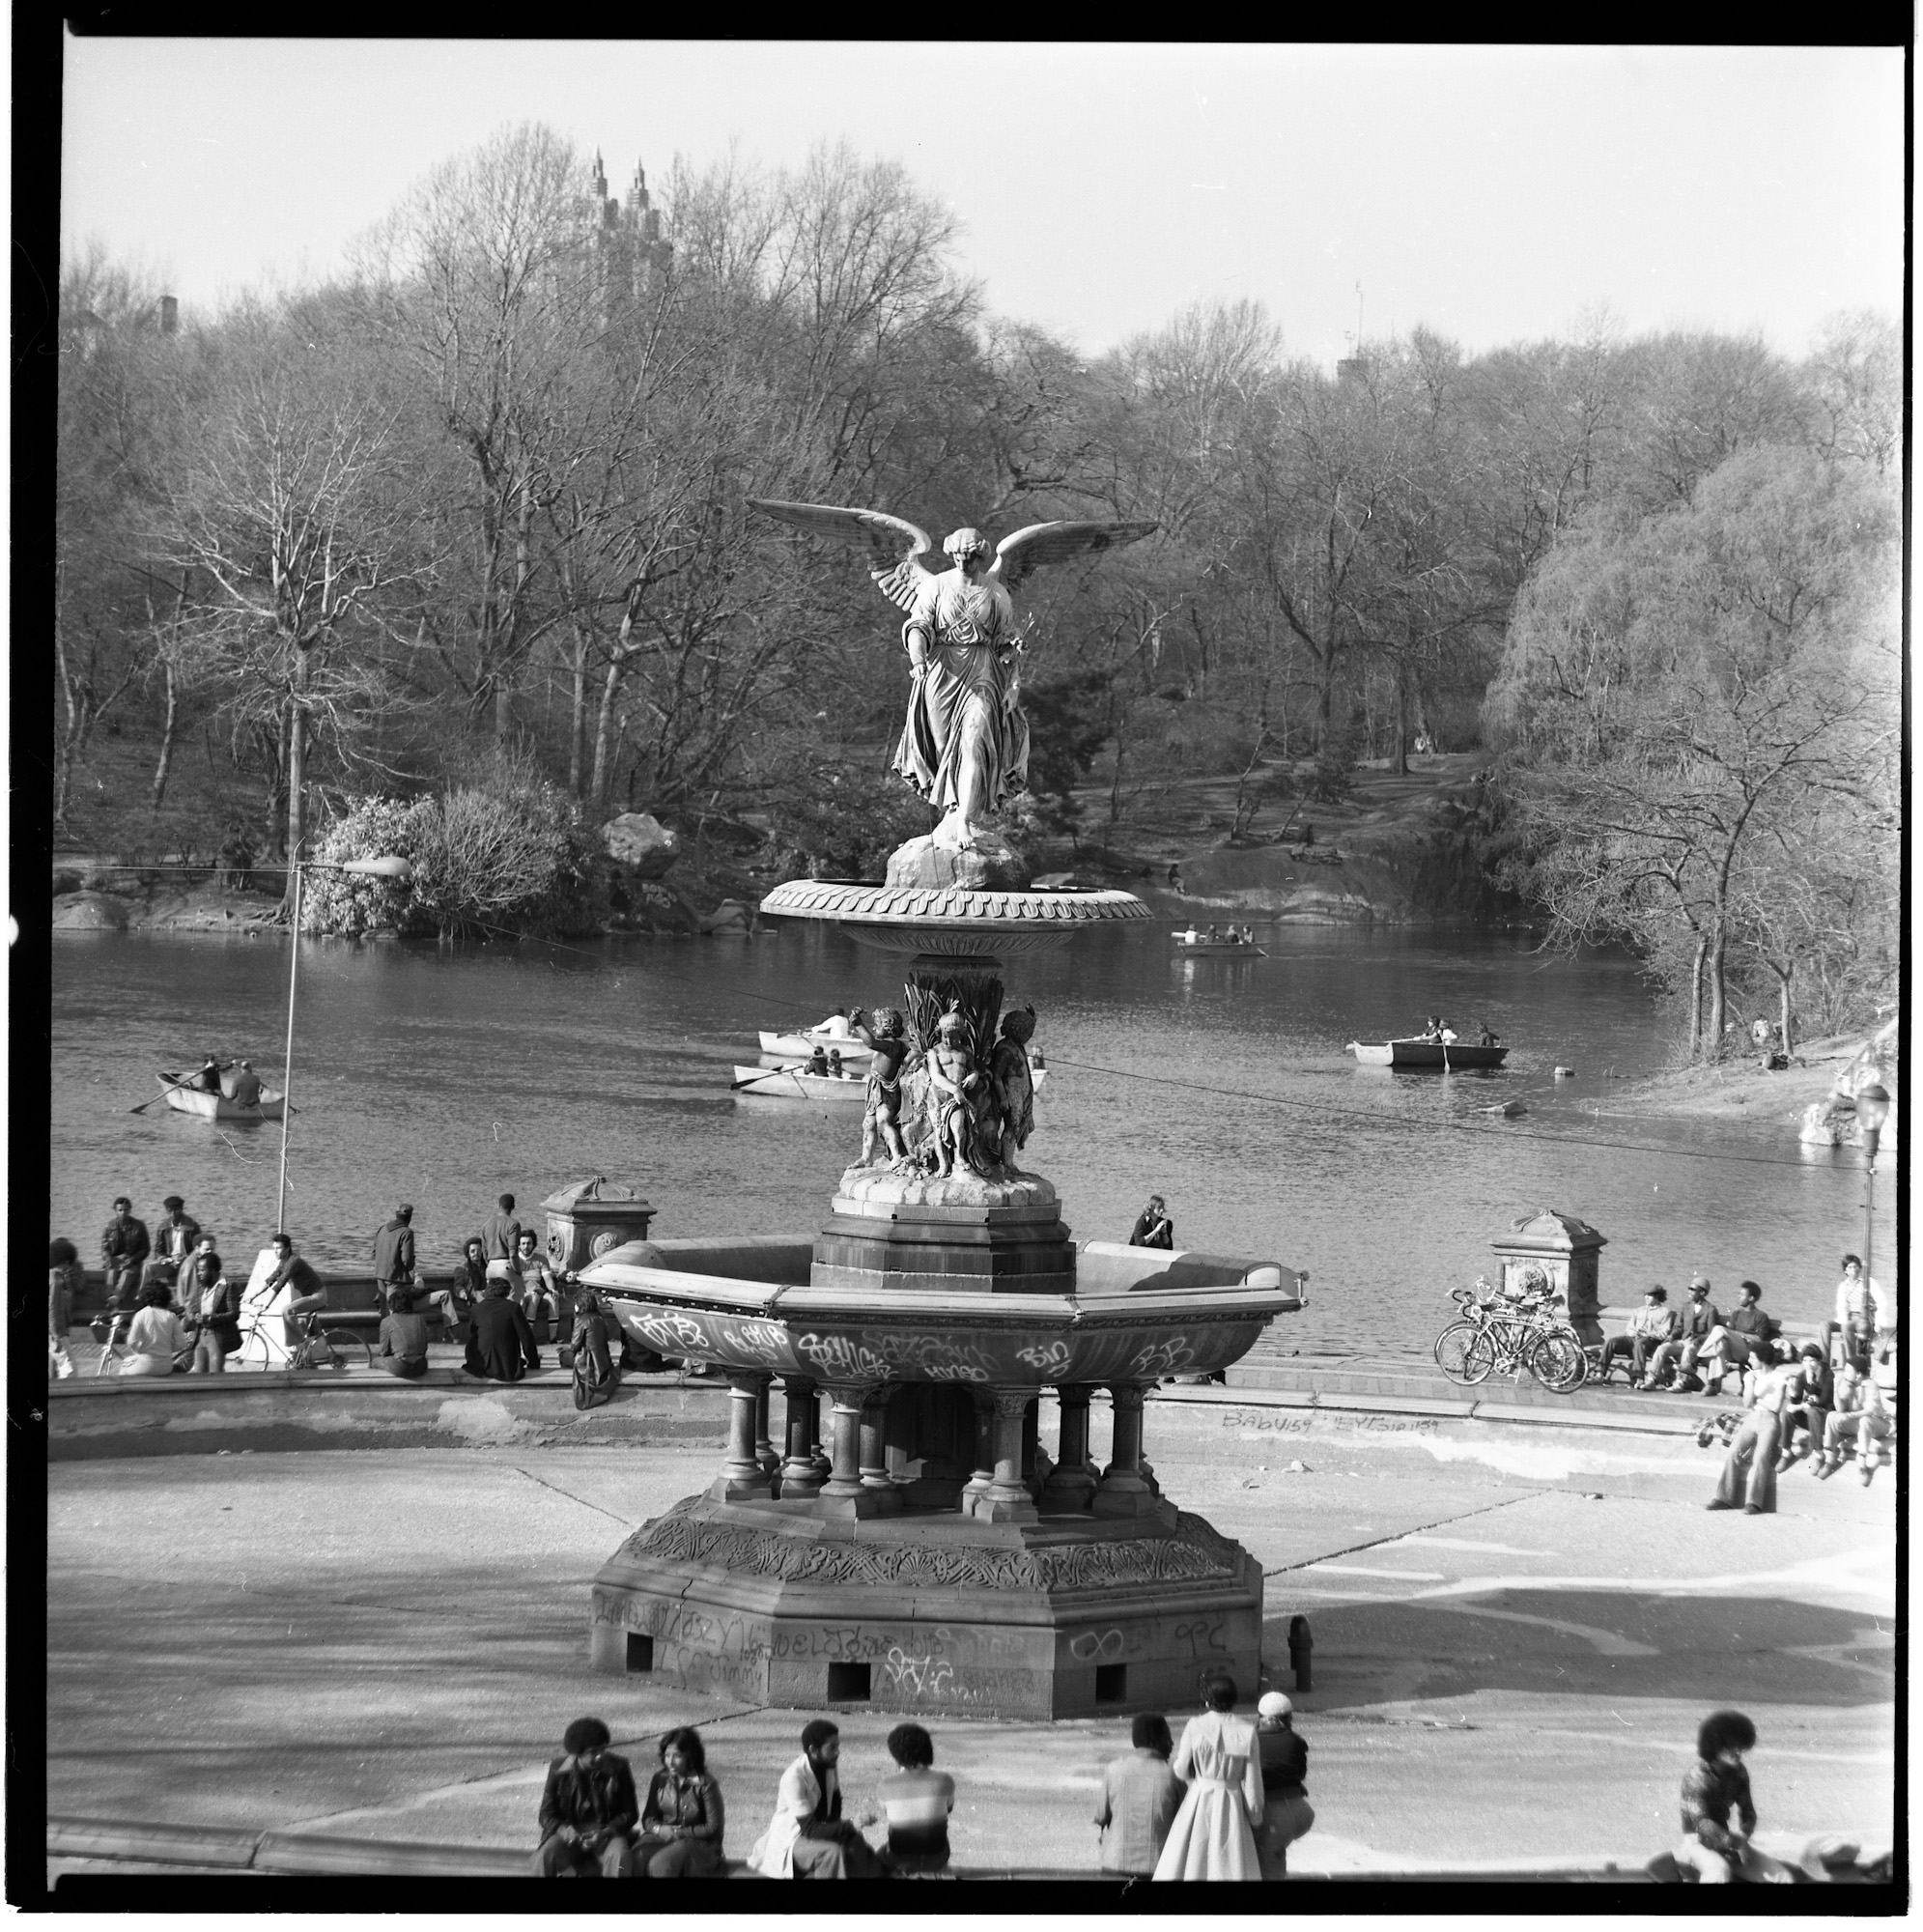 Bethesda Fountain, Central Park, New York City, Winter 1975. Film was 220 roll film loaded in a Bronica (6 x 6 format). View full size.